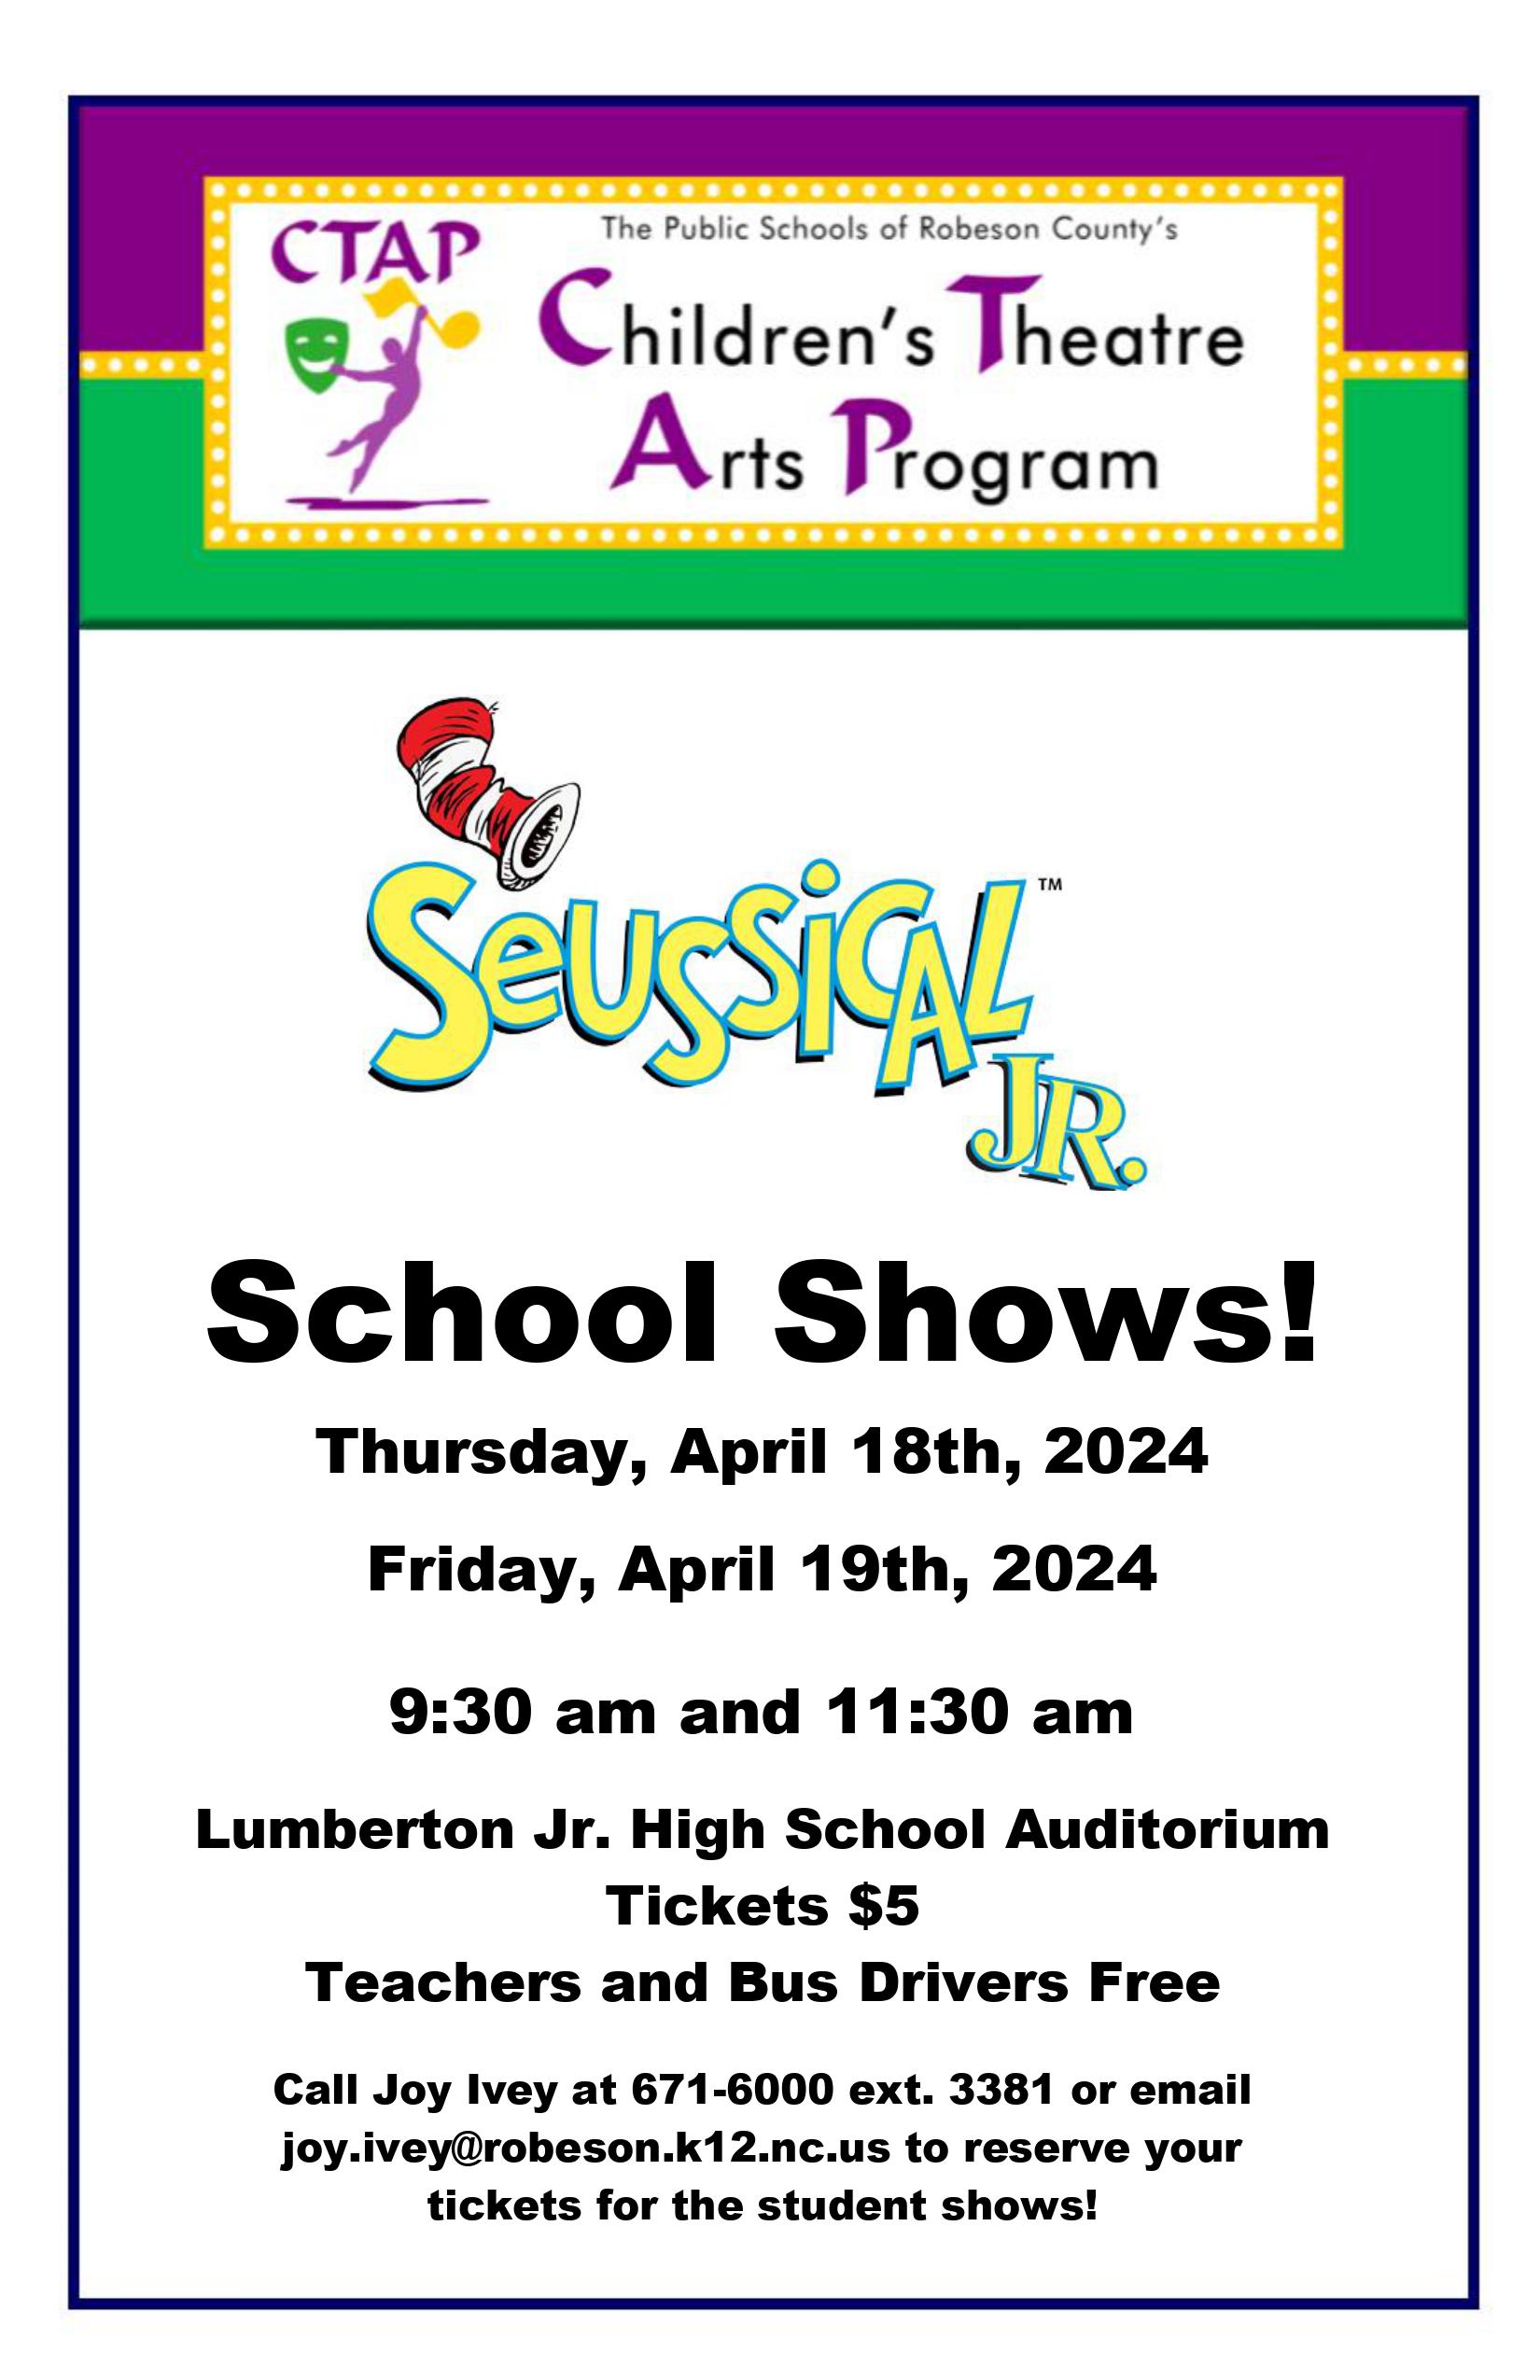 Seussical School Performances April 18 and 19 9:30am and 11:30am Contact Joy Ivey at Central Office to book